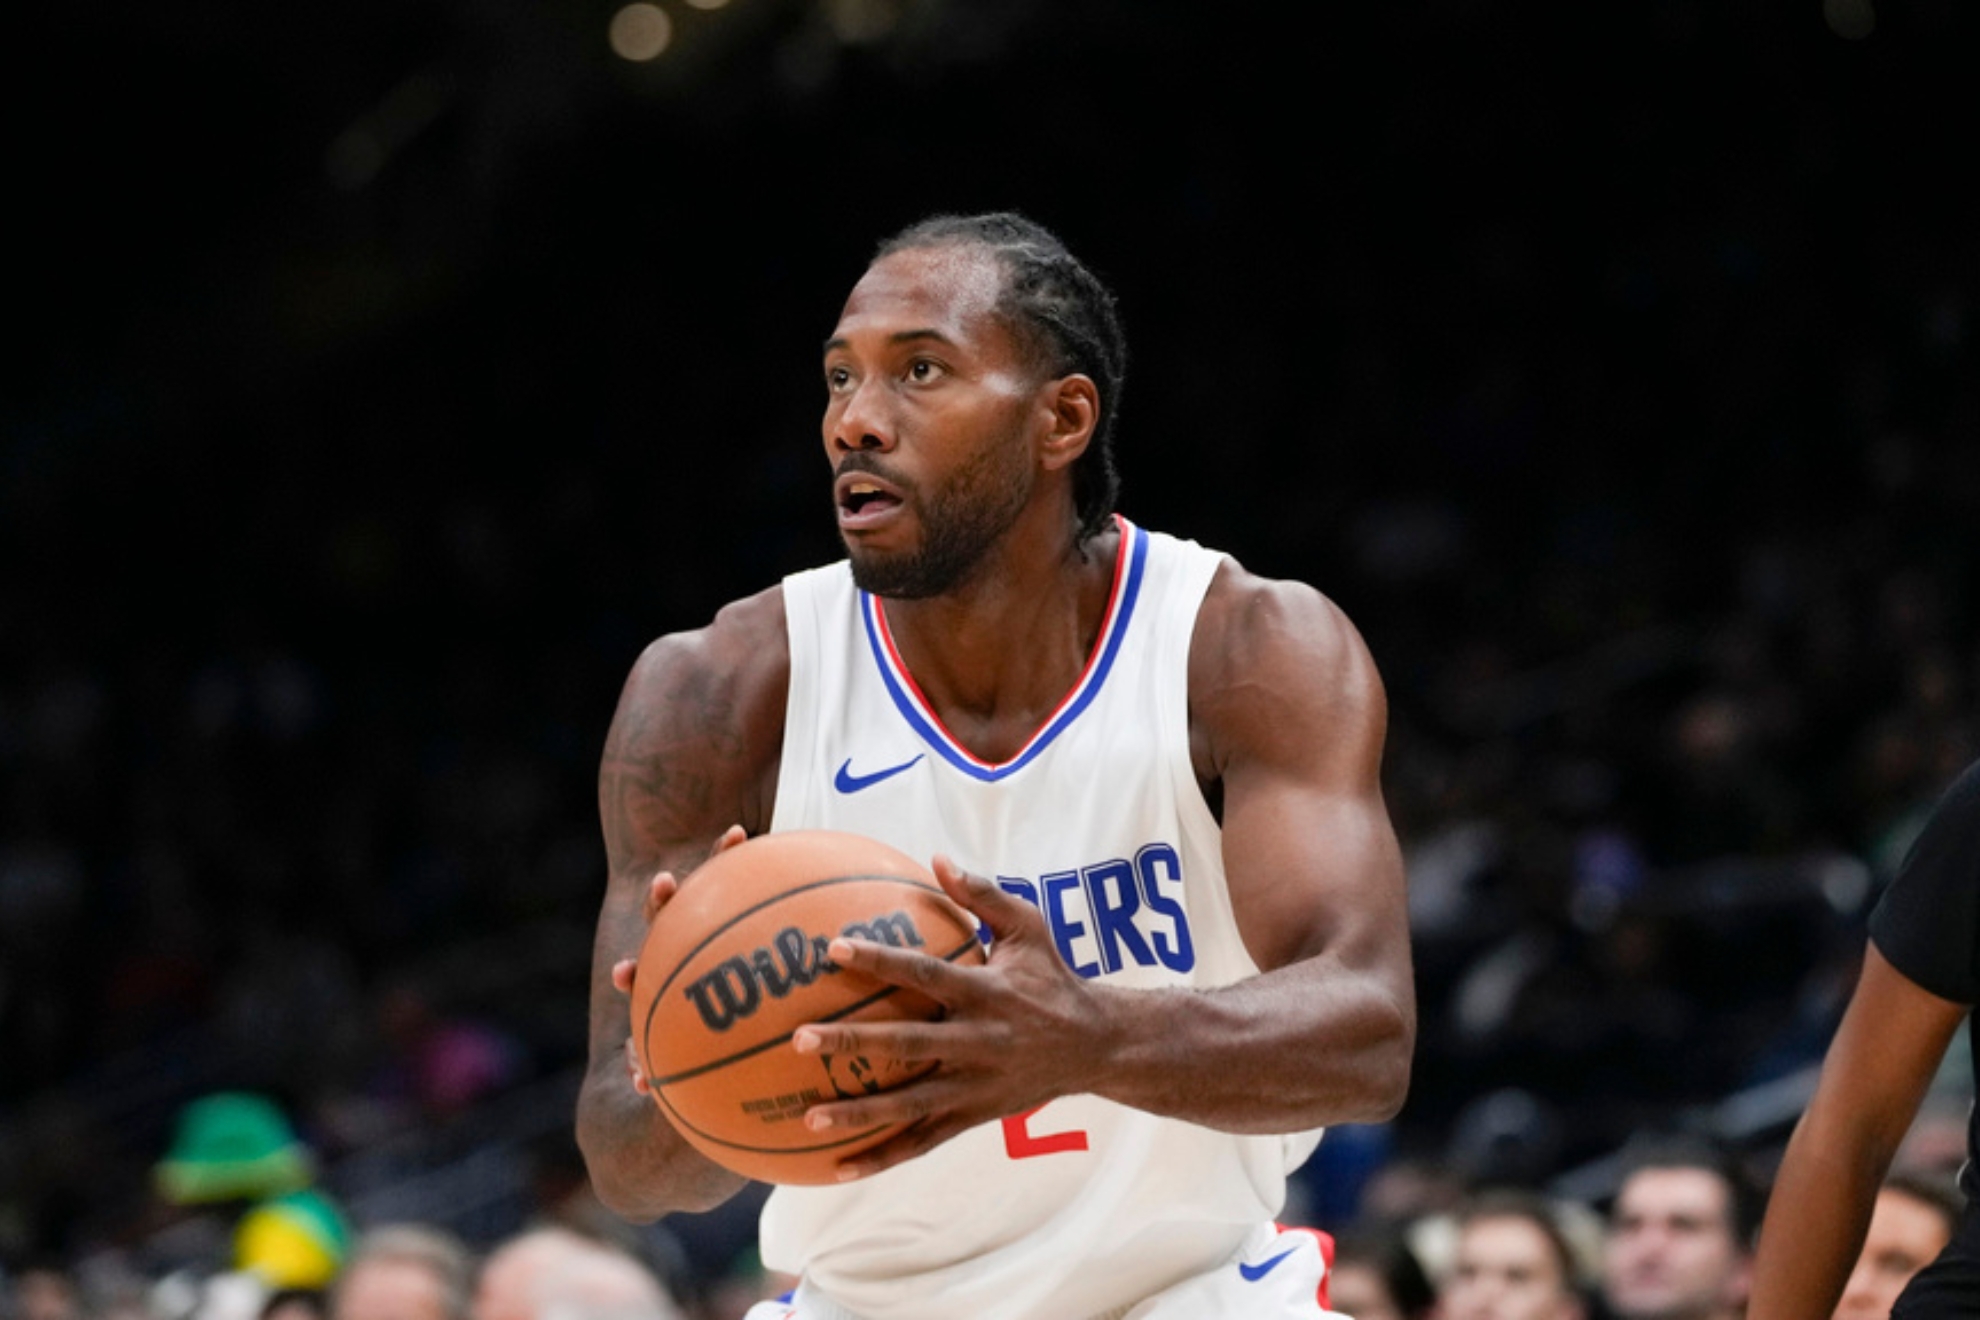 Leonard will look to take the Clippers over the hump this year